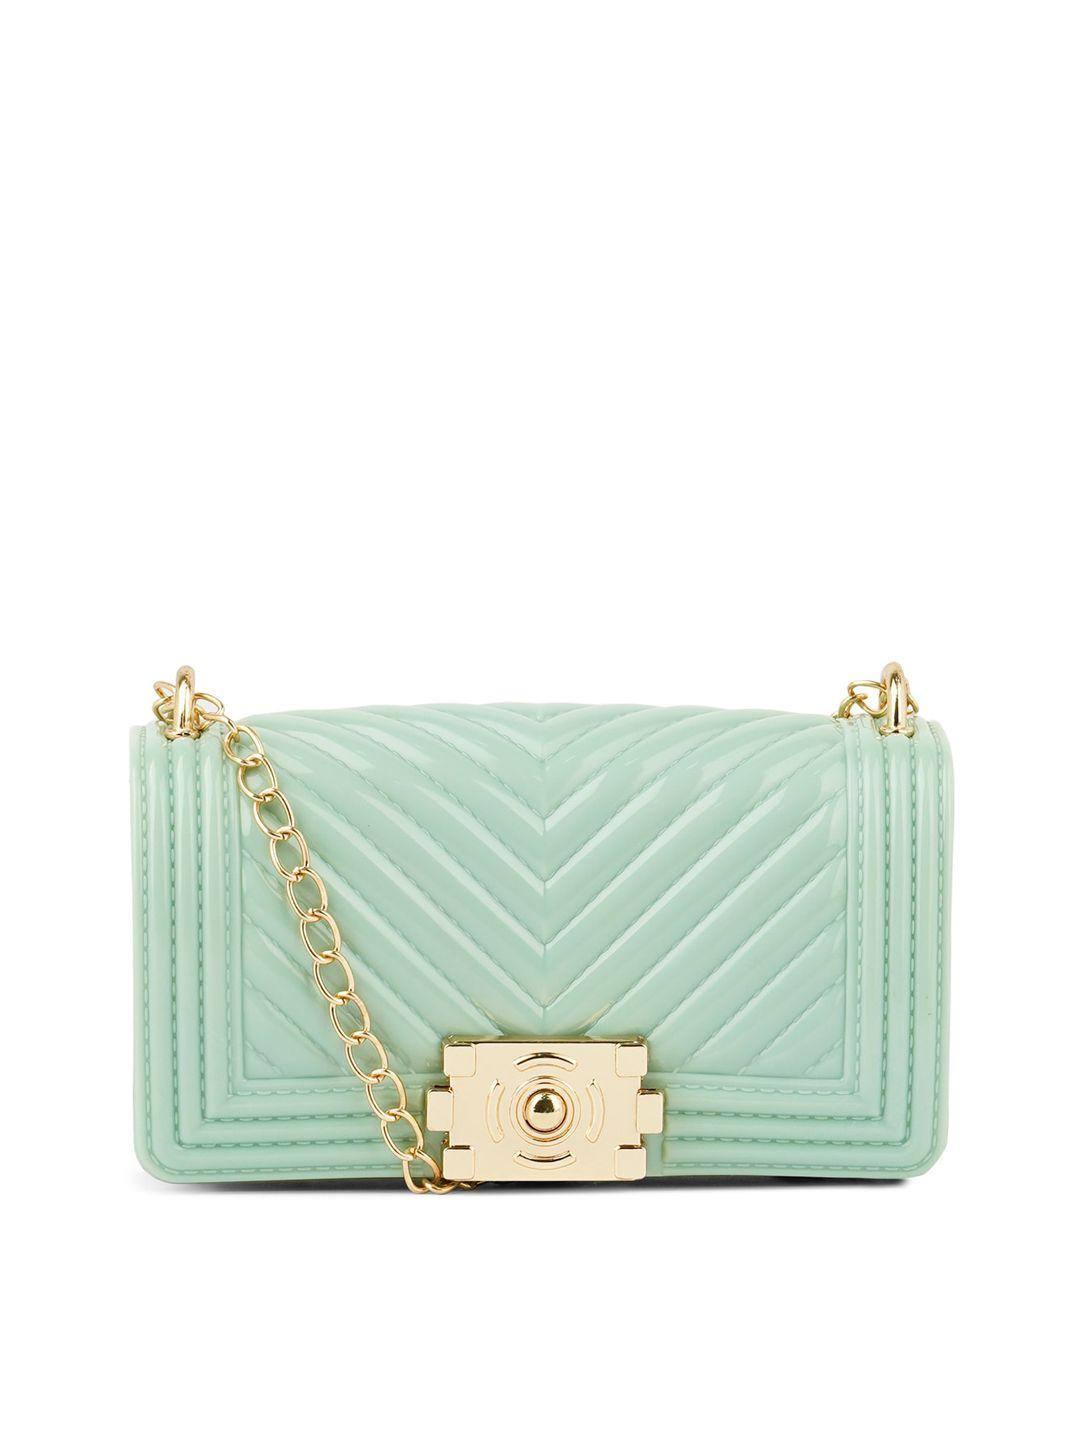 london rag green textured structured sling bag with quilted